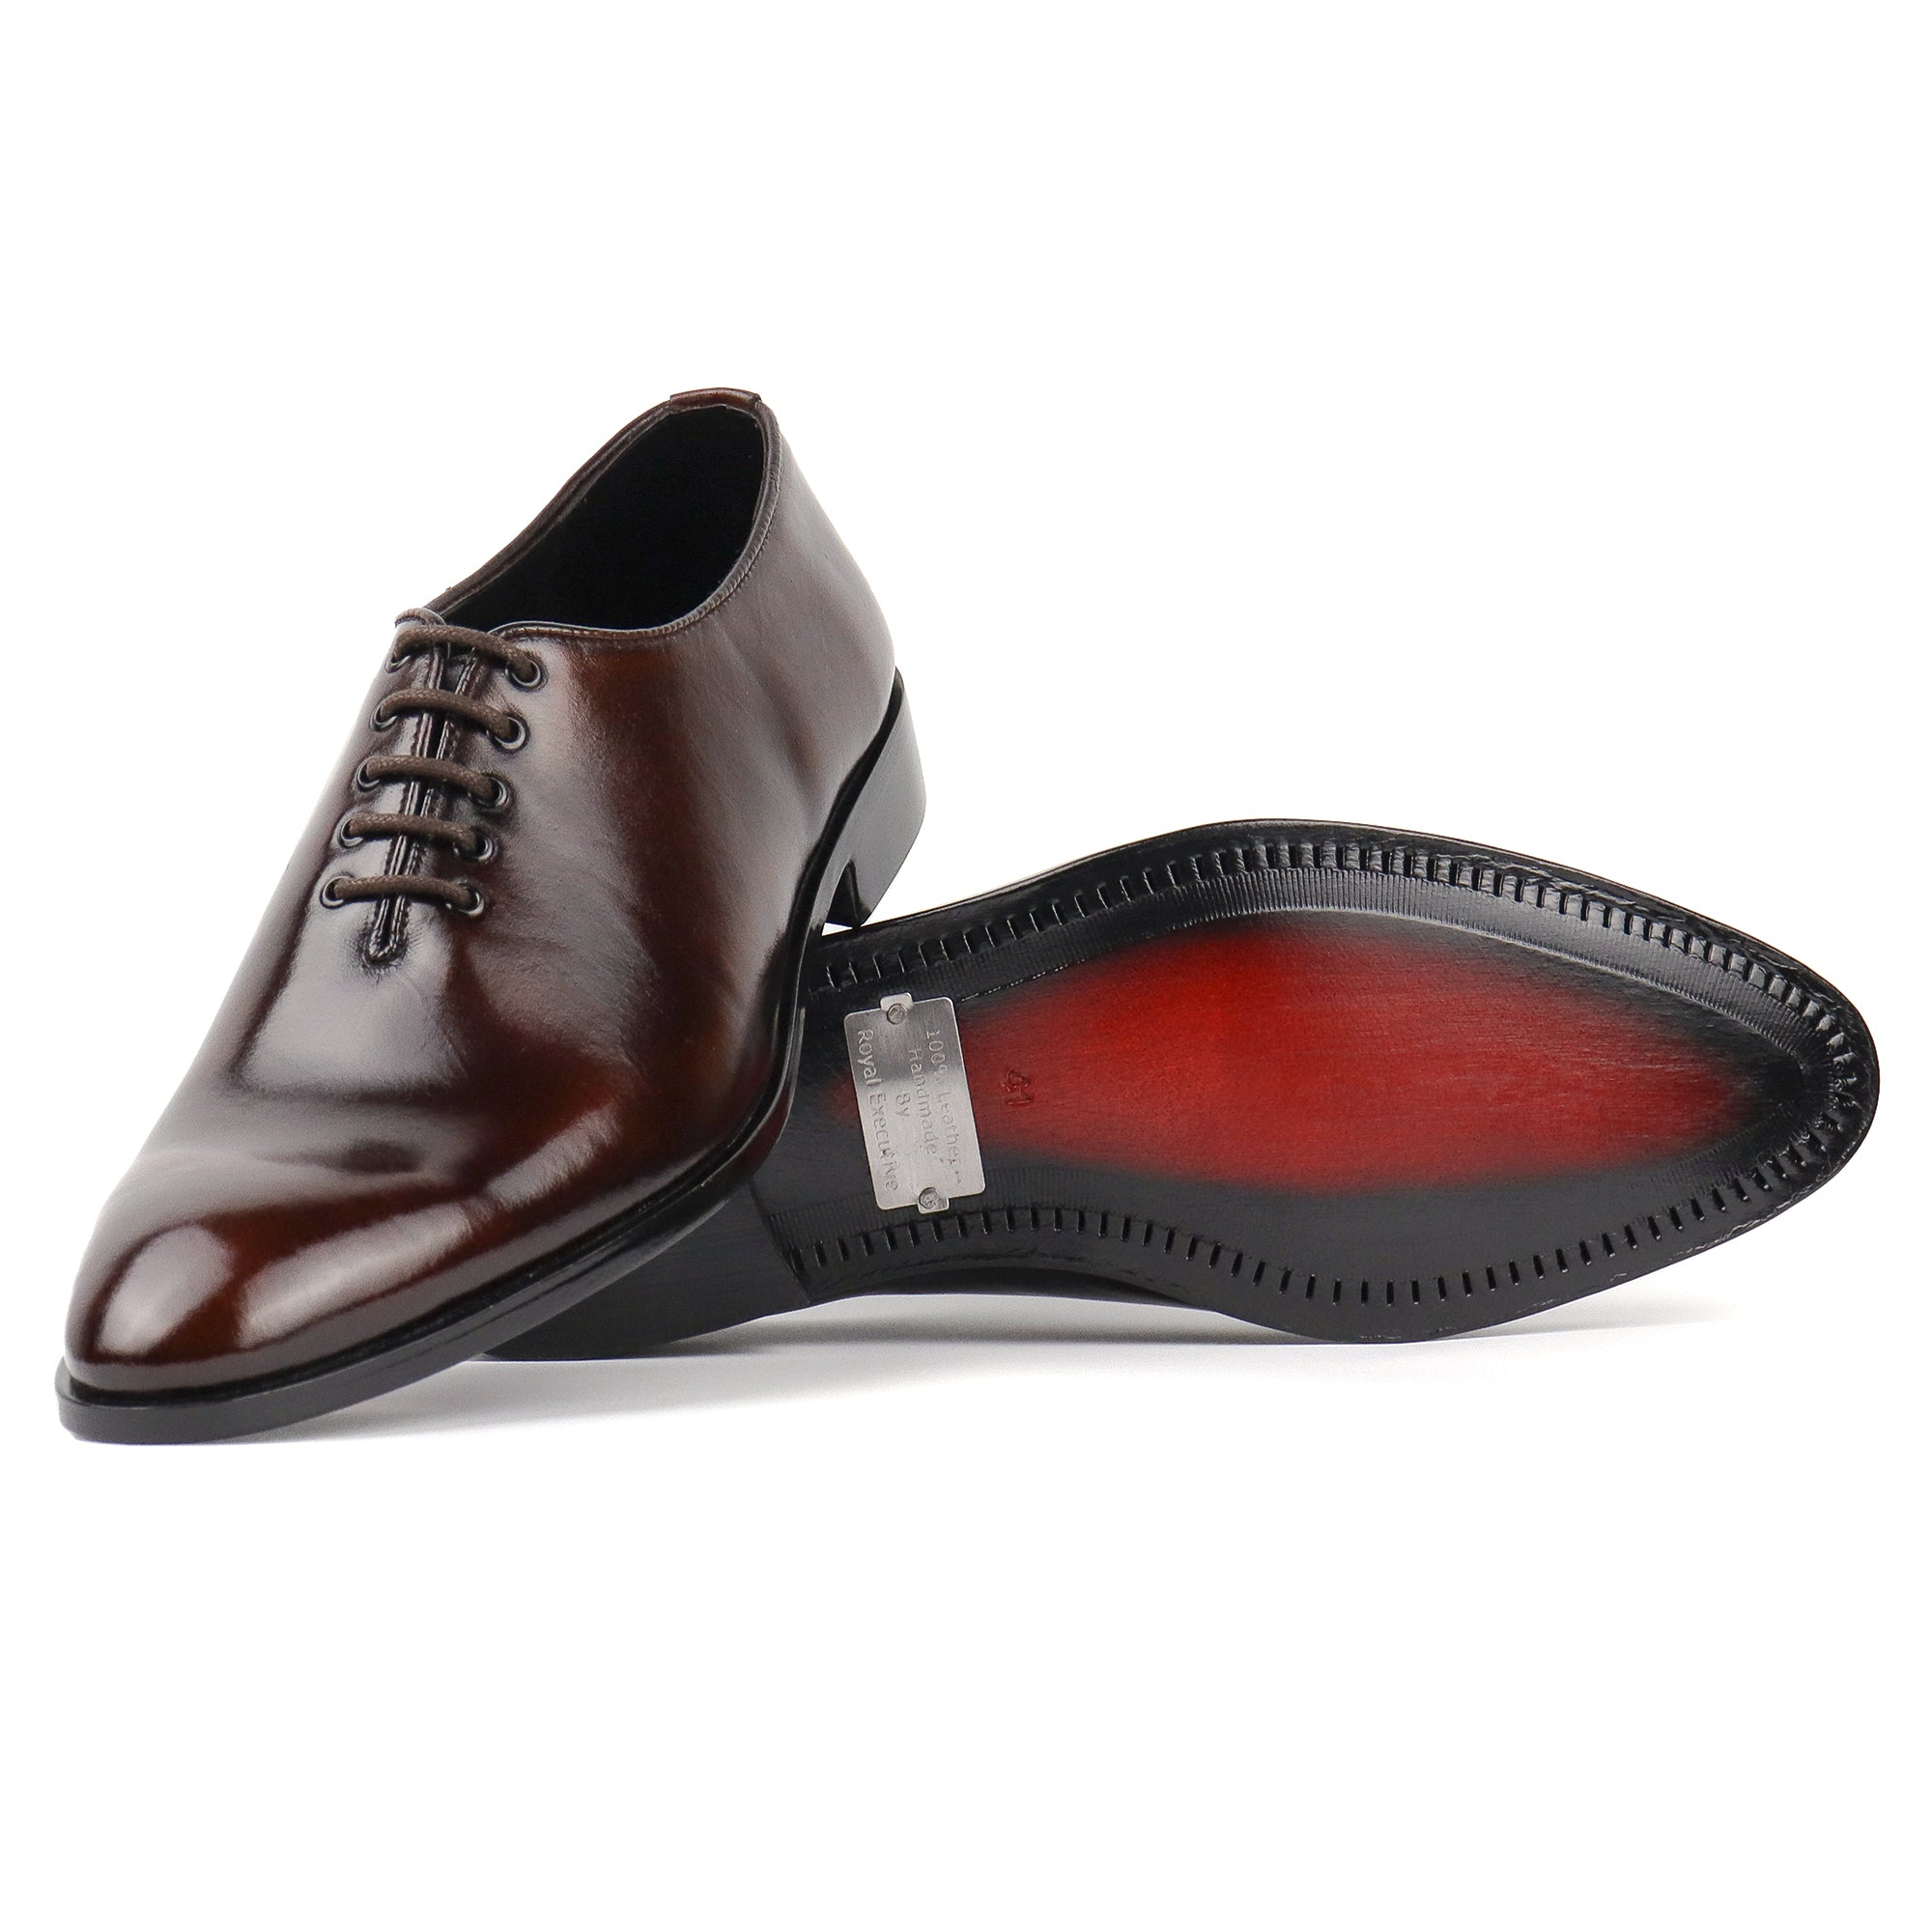 Whole cut patina - Premium Shoes from royalstepshops - Just Rs.9000! Shop now at ROYAL STEP